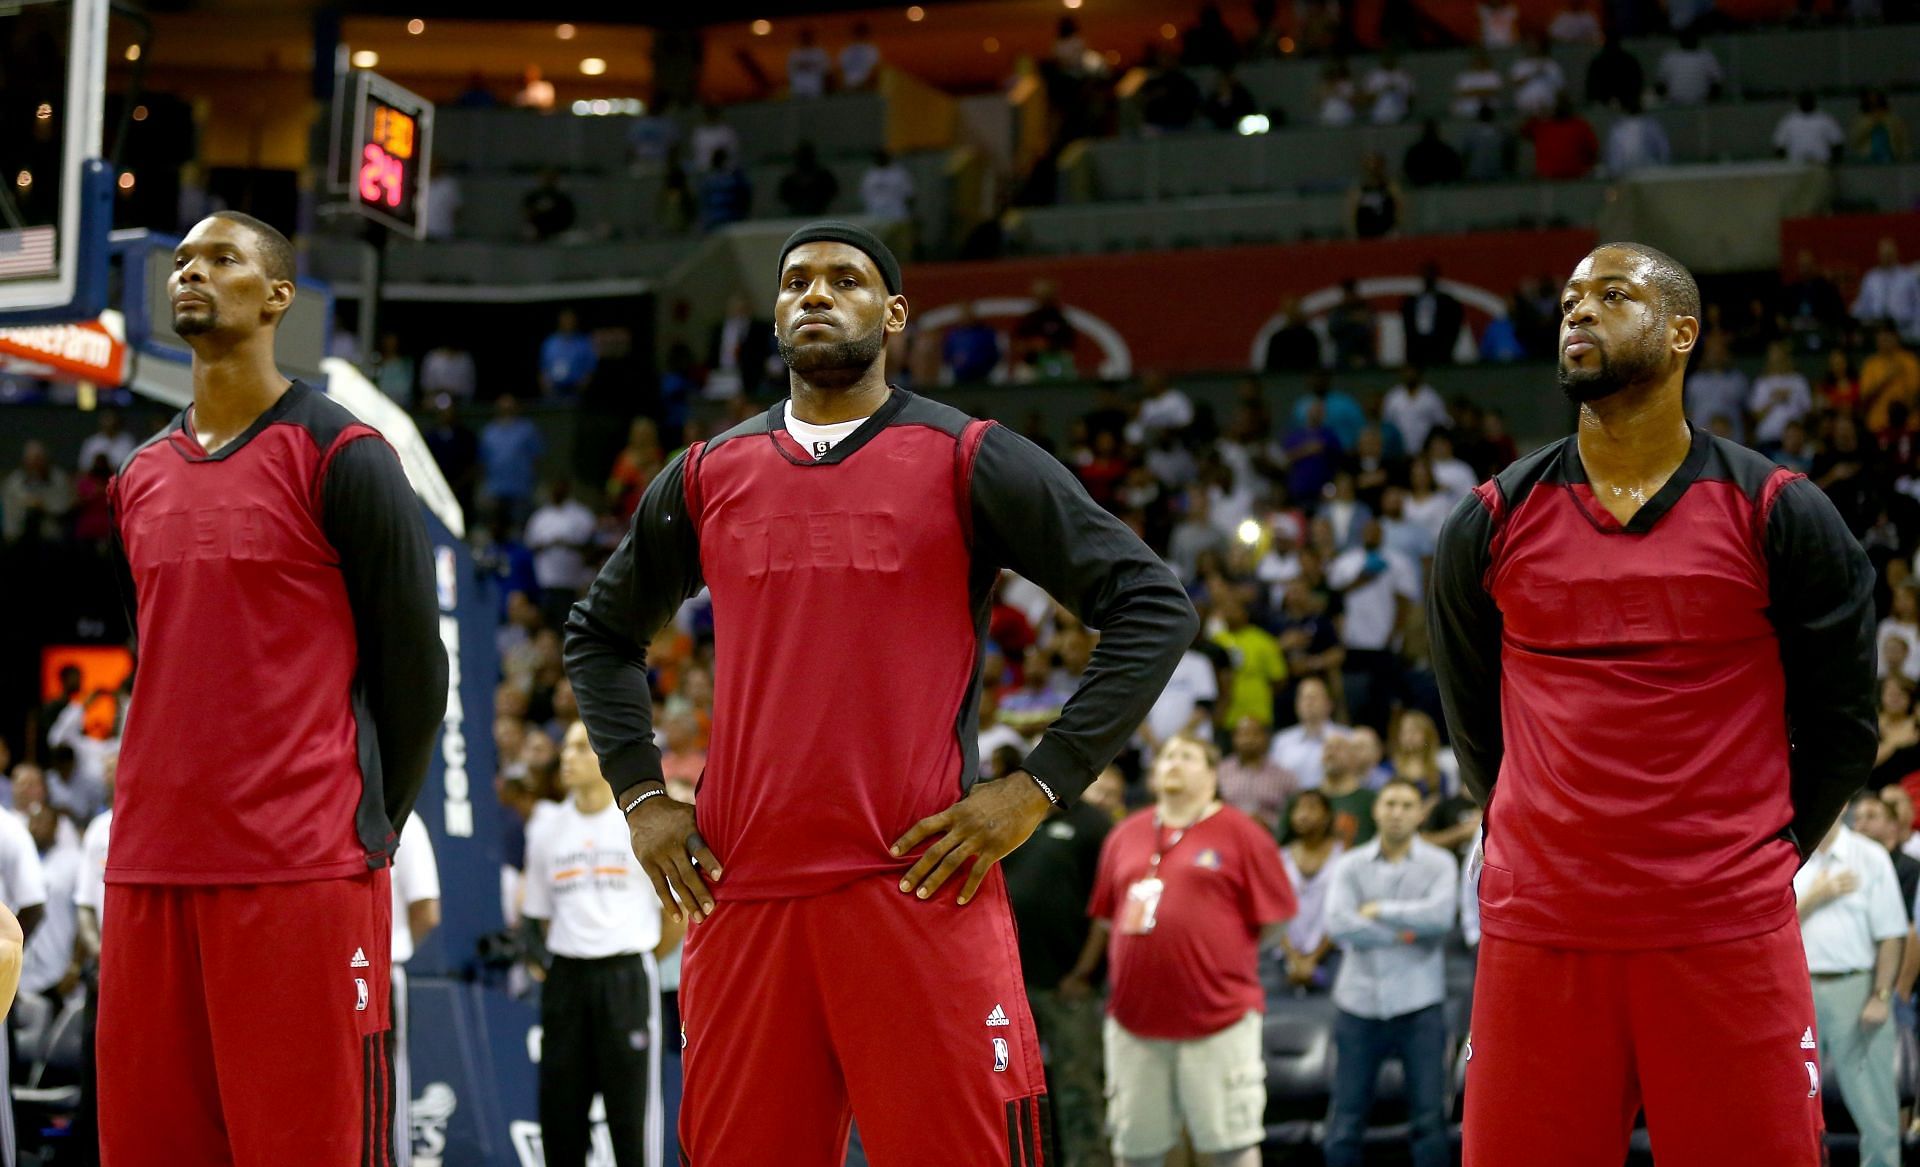 Chris Bosh(L), Dwayne Wade and Lebron James(R) helped the Heat win two consecutive NBA titles